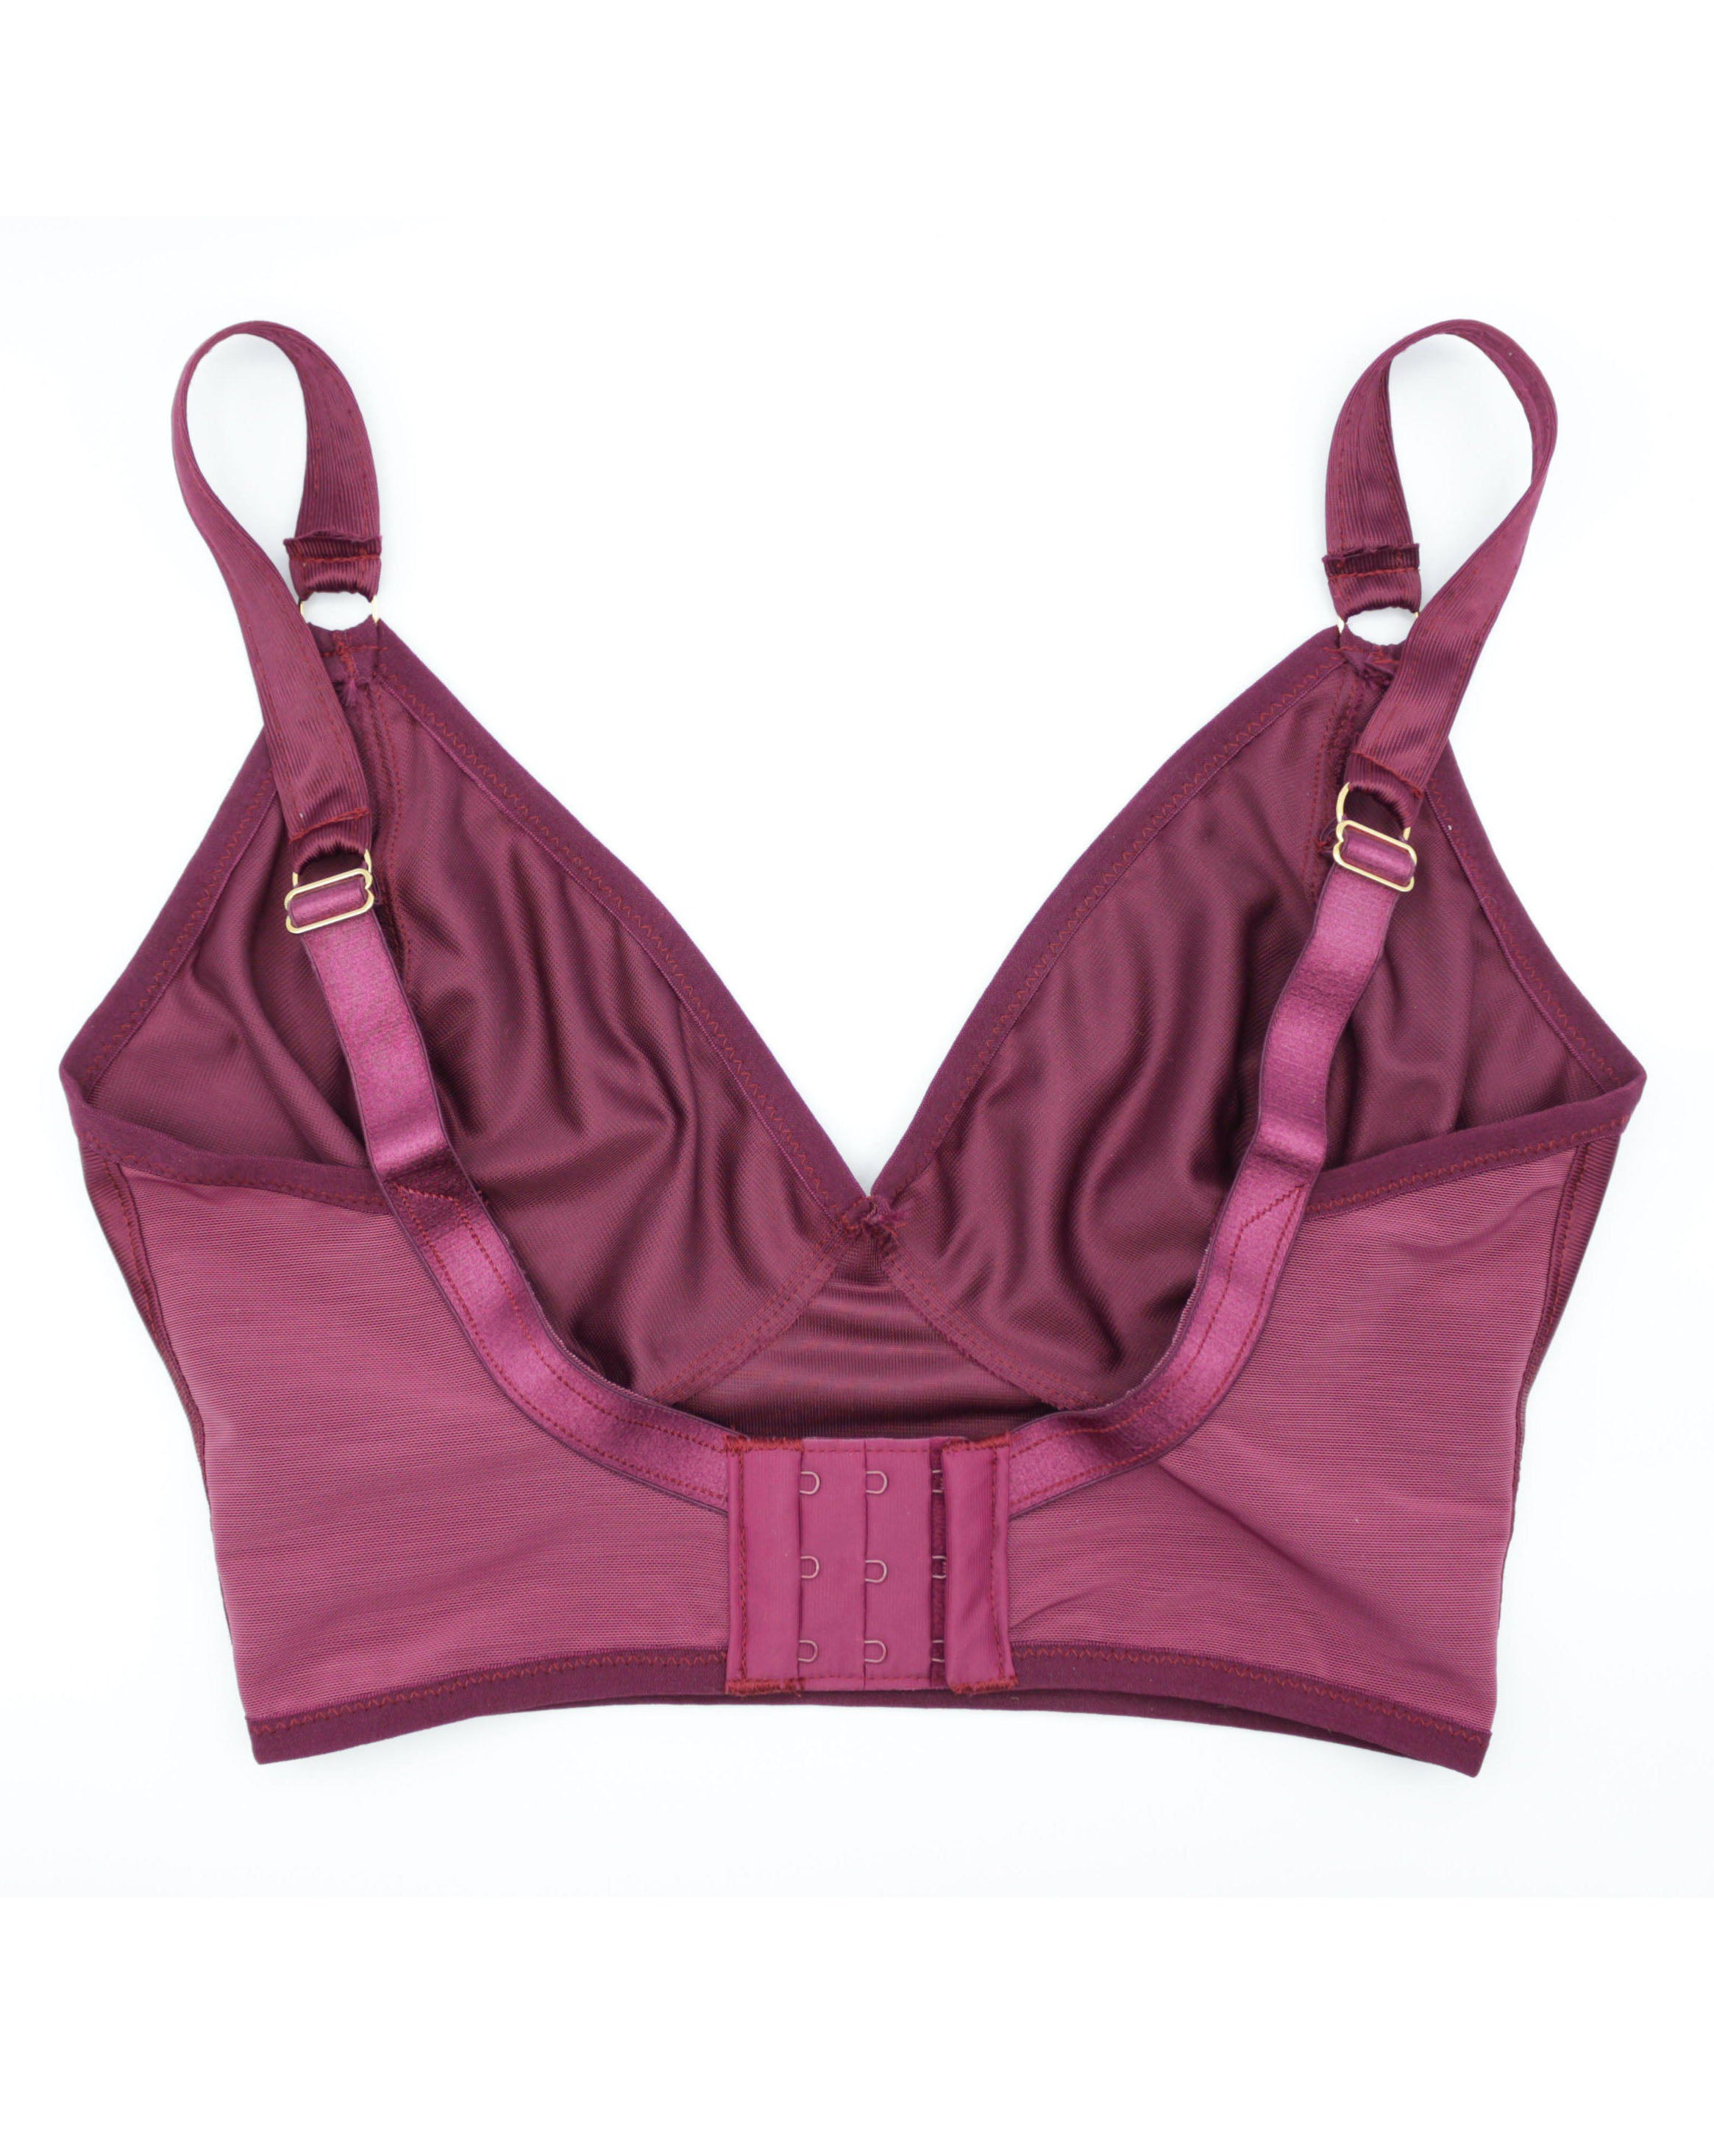 Solid satin bralette. Made in Canada